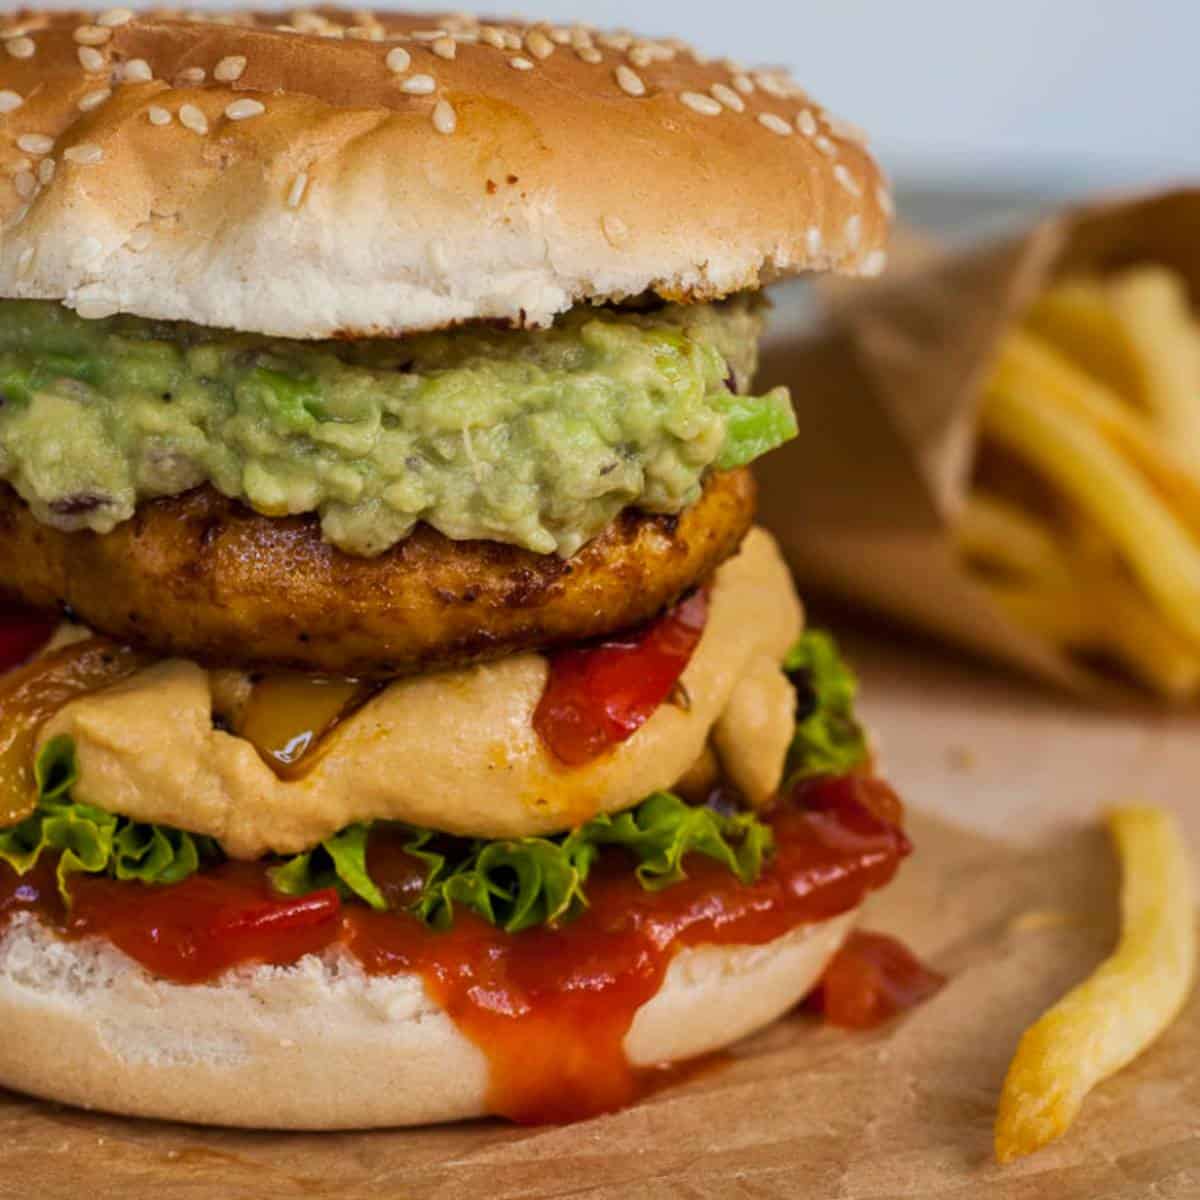 a mushroom burger topped with guacamole and cheese sauce.